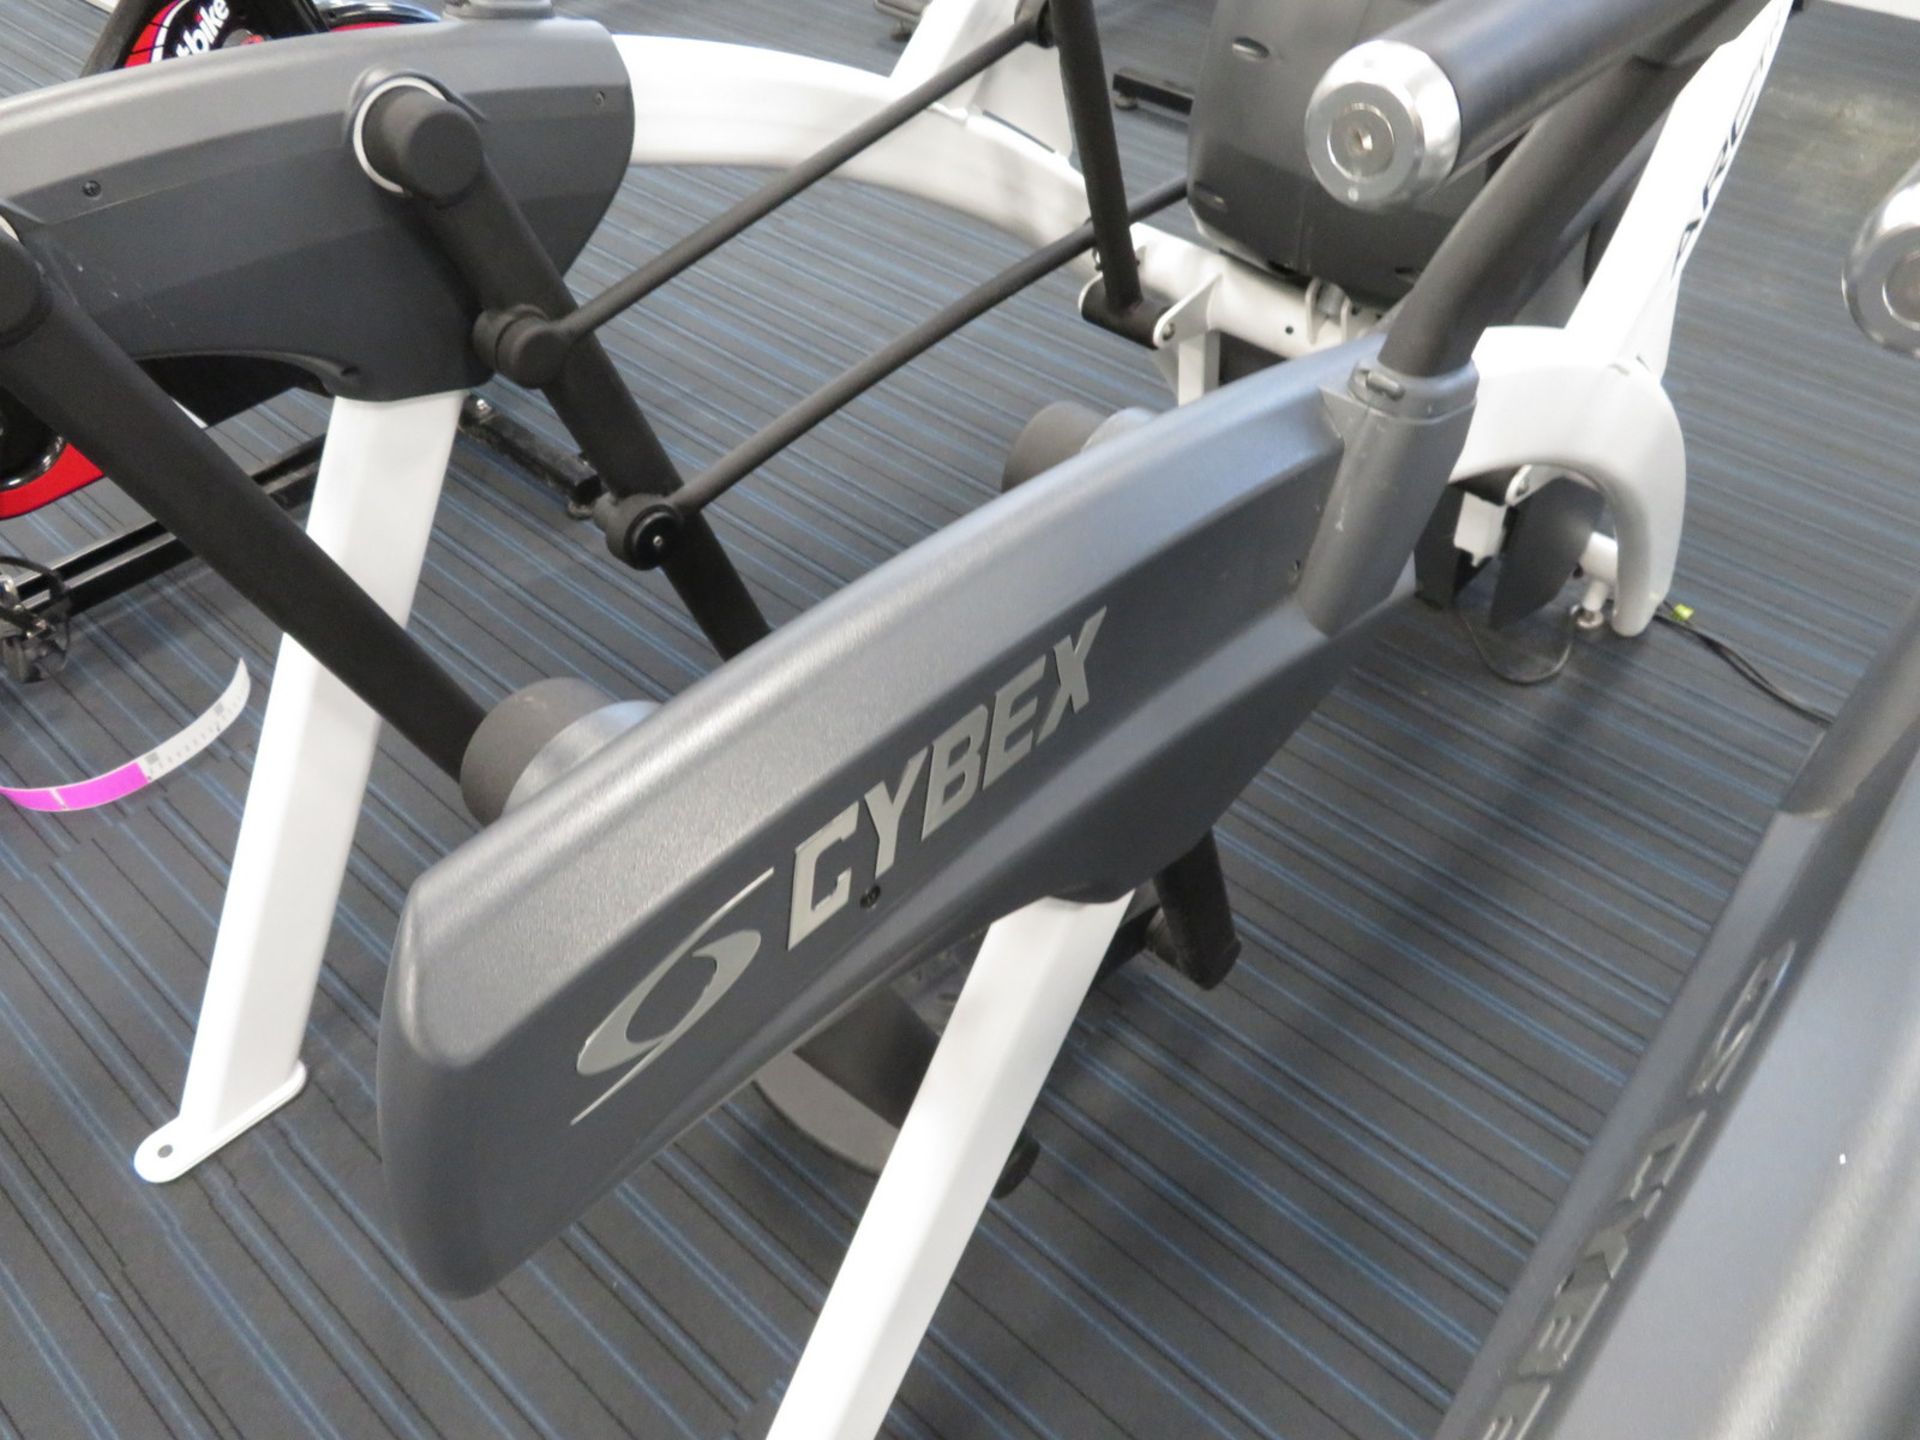 Cybex Arc Trainer Model: 772AT. Working Condition With TV Display Monitor. Dimensions: 190 - Image 4 of 11